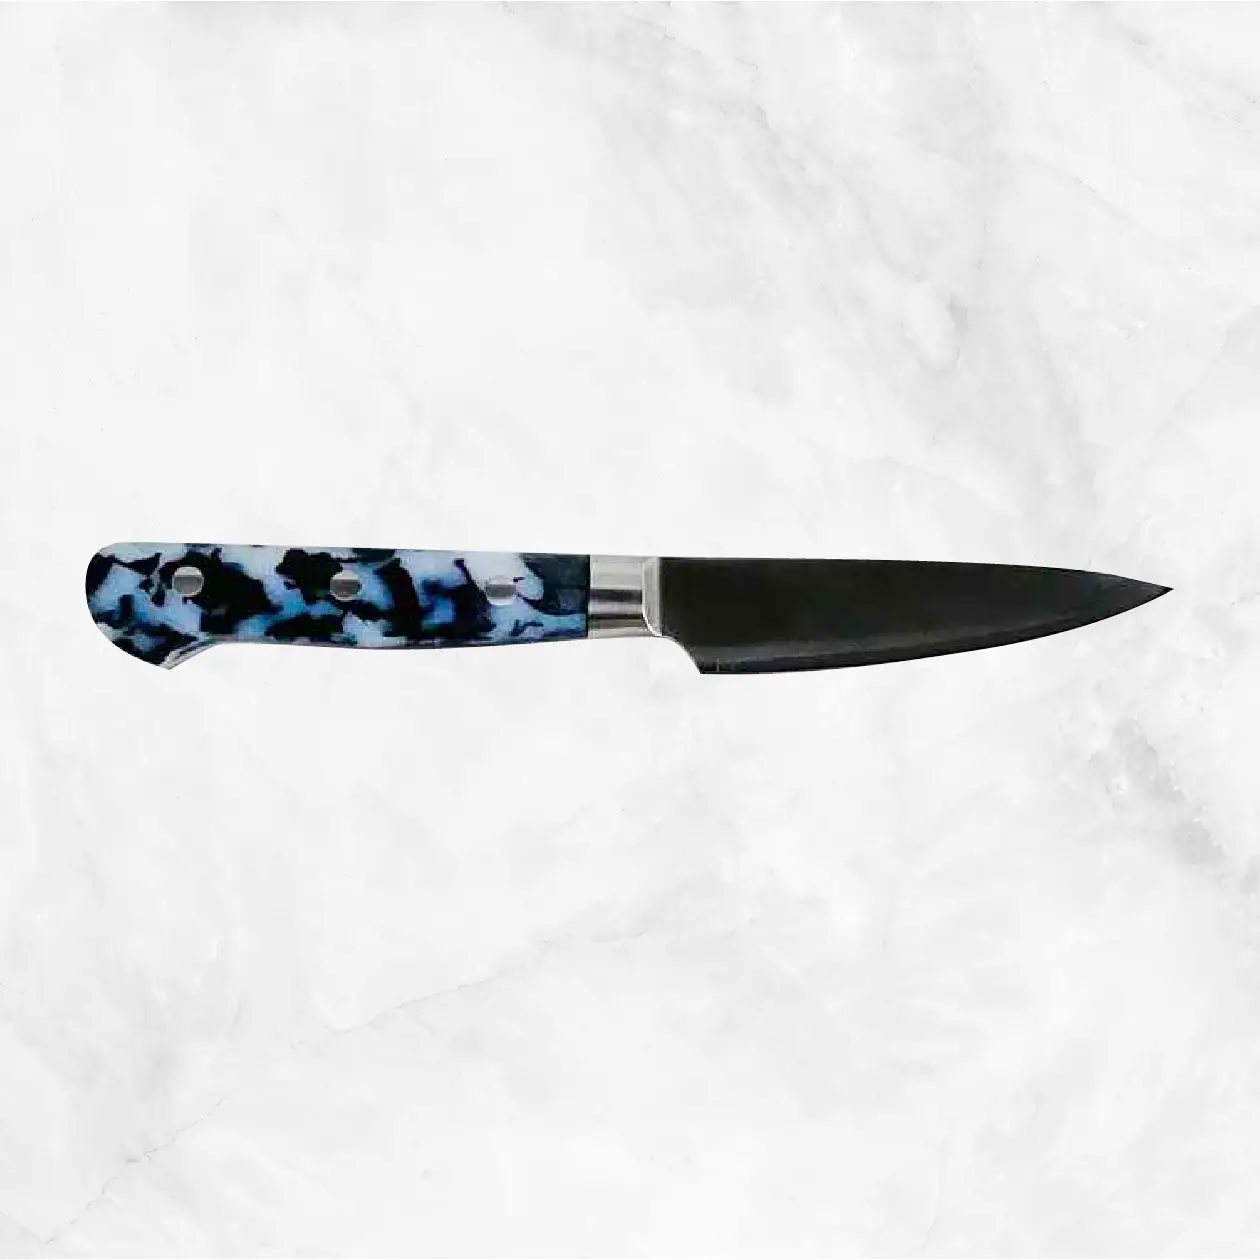 Black/White Paring Knife Delivery